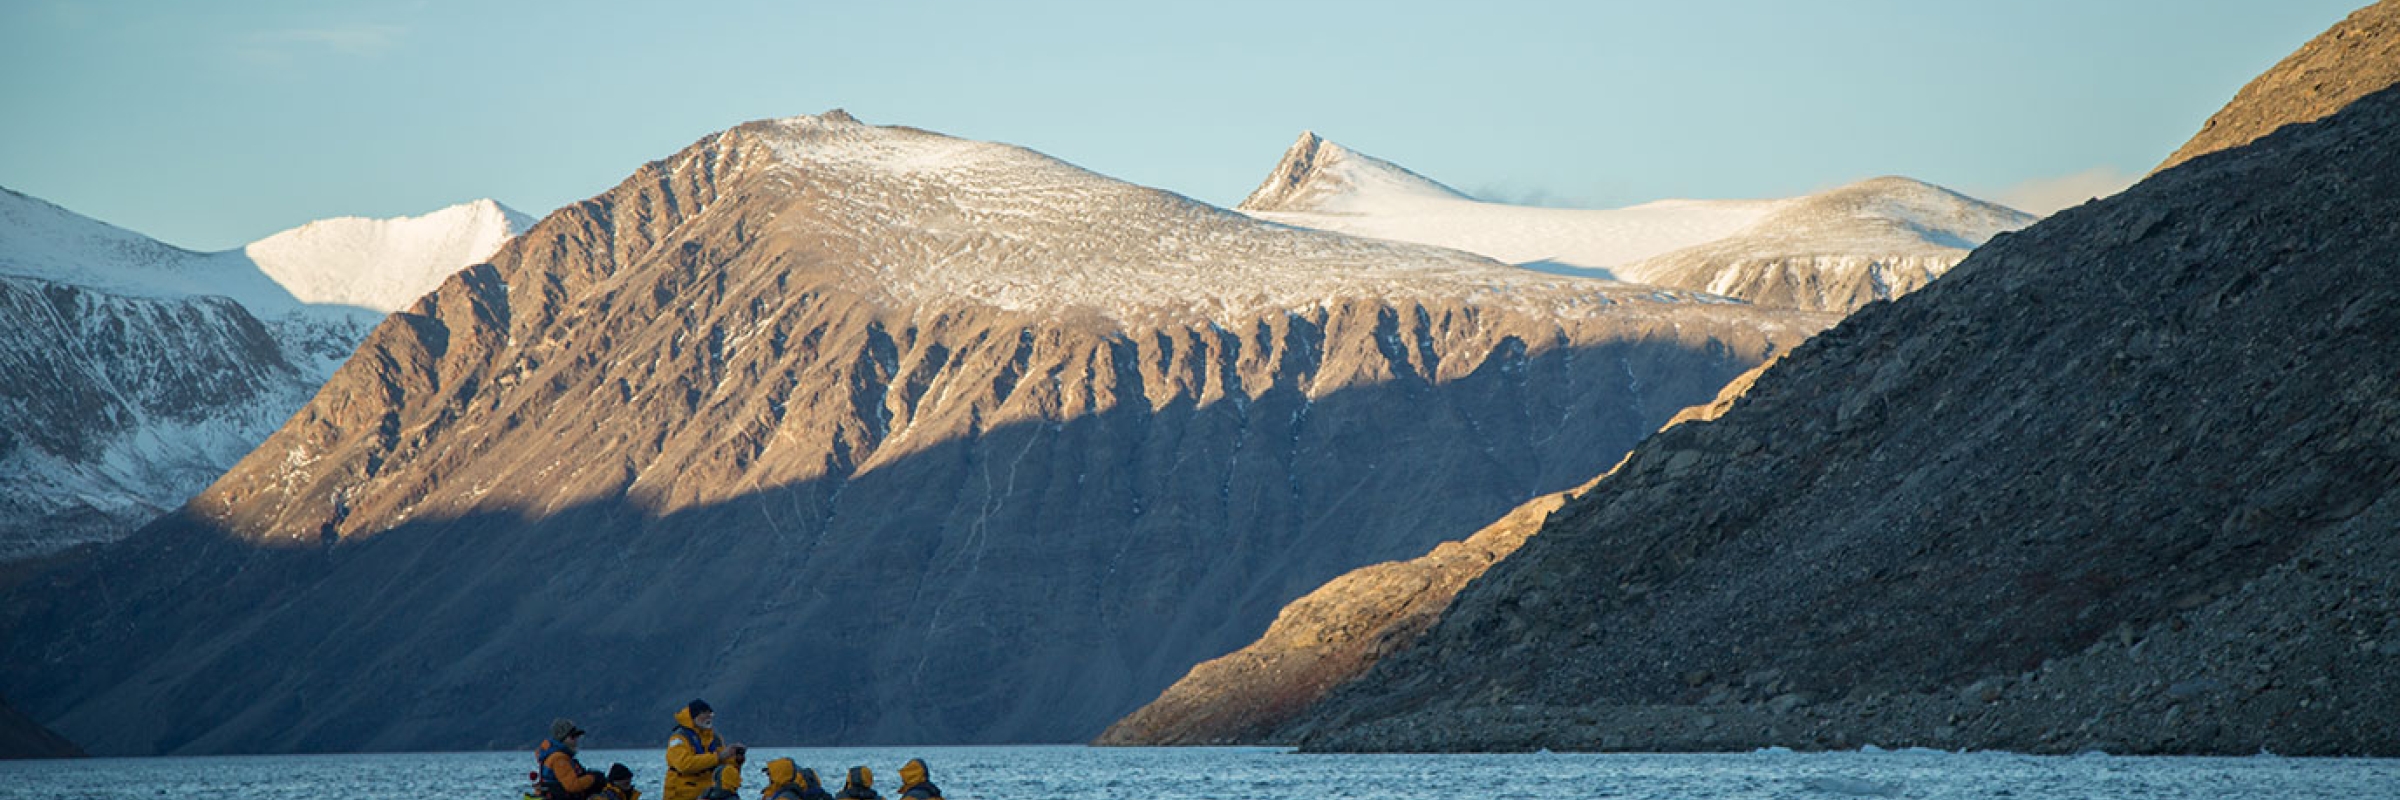 Guests Zodiac cruising Sunneshine Fjord, Baffin Island in the Canadian High Arctic - Photo by Acacia Johnson